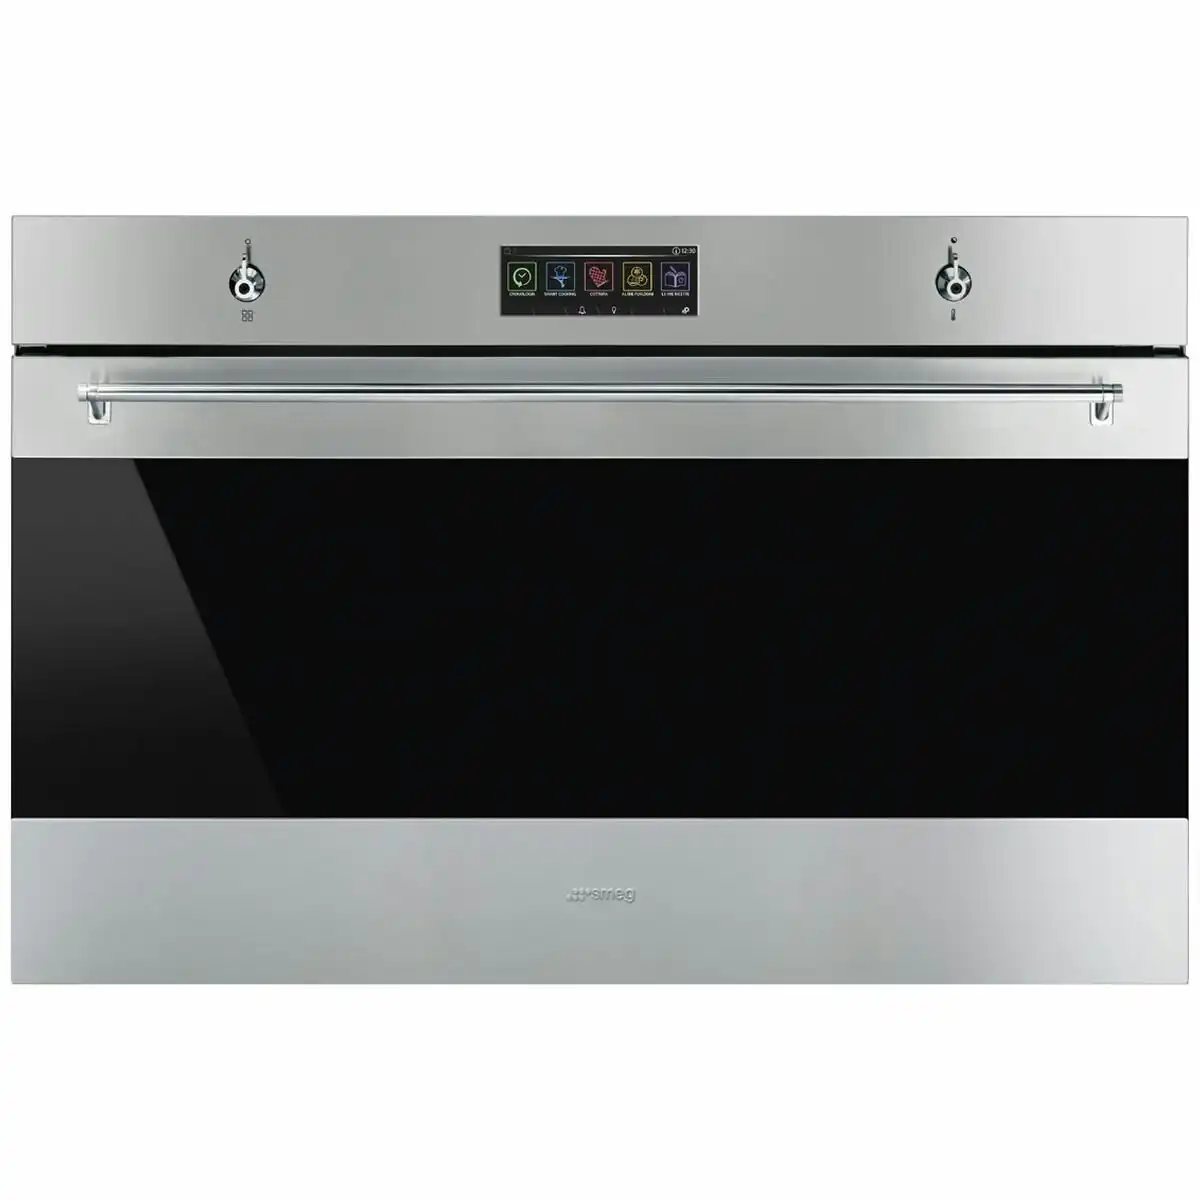 SMEG 90cm Classic Thermoseal Pyrolytic Built-In Oven